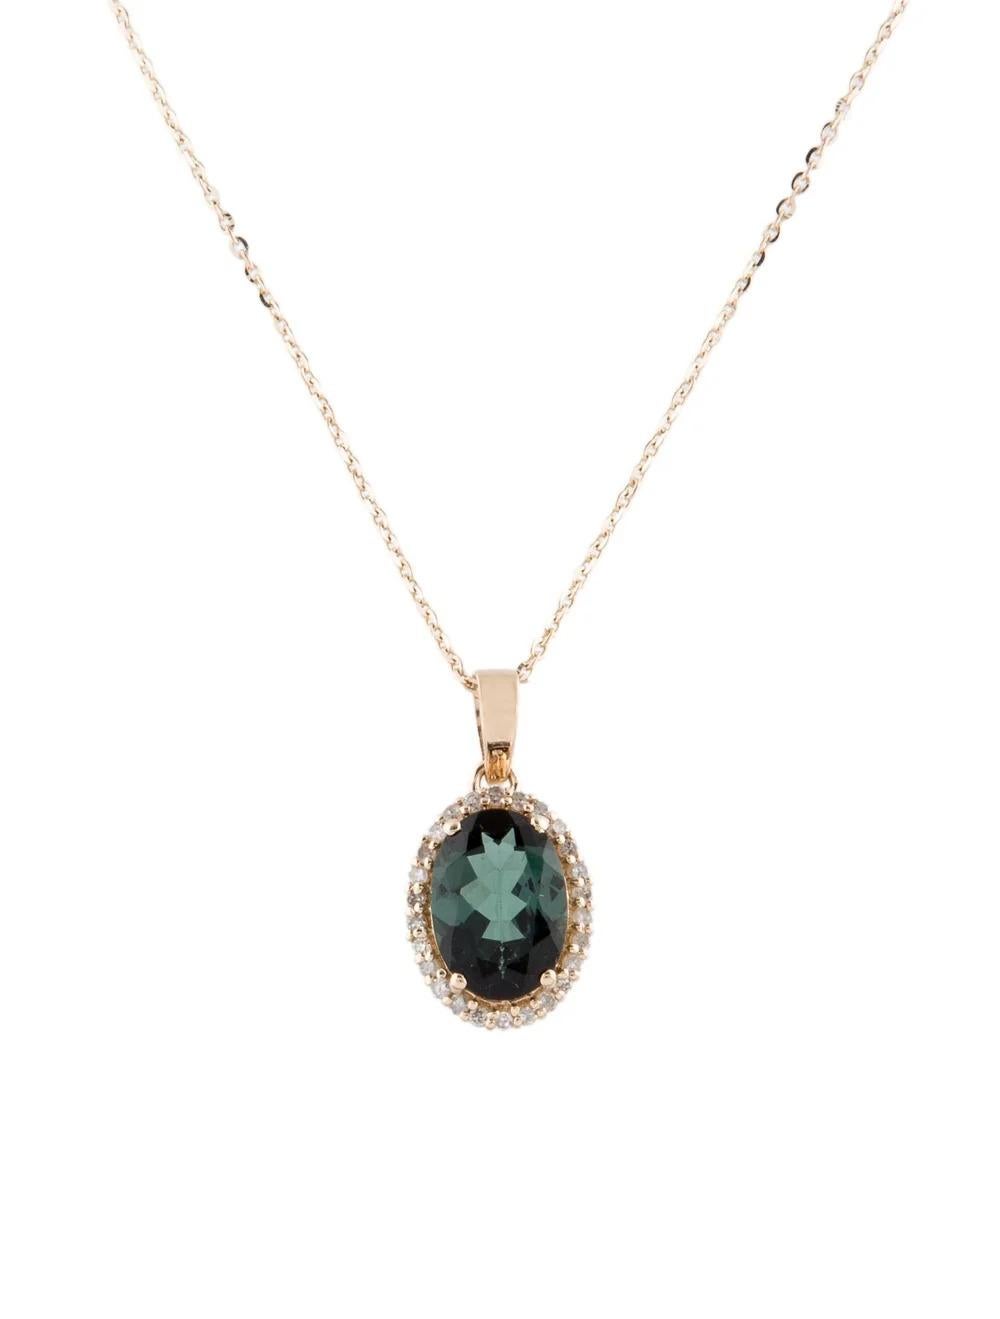 Indulge in the enchanting allure of this exquisite 14K yellow gold pendant necklace, featuring a mesmerizing 1.74 carat oval brilliant tourmaline as its centerpiece. Crafted with meticulous attention to detail, this piece radiates elegance and